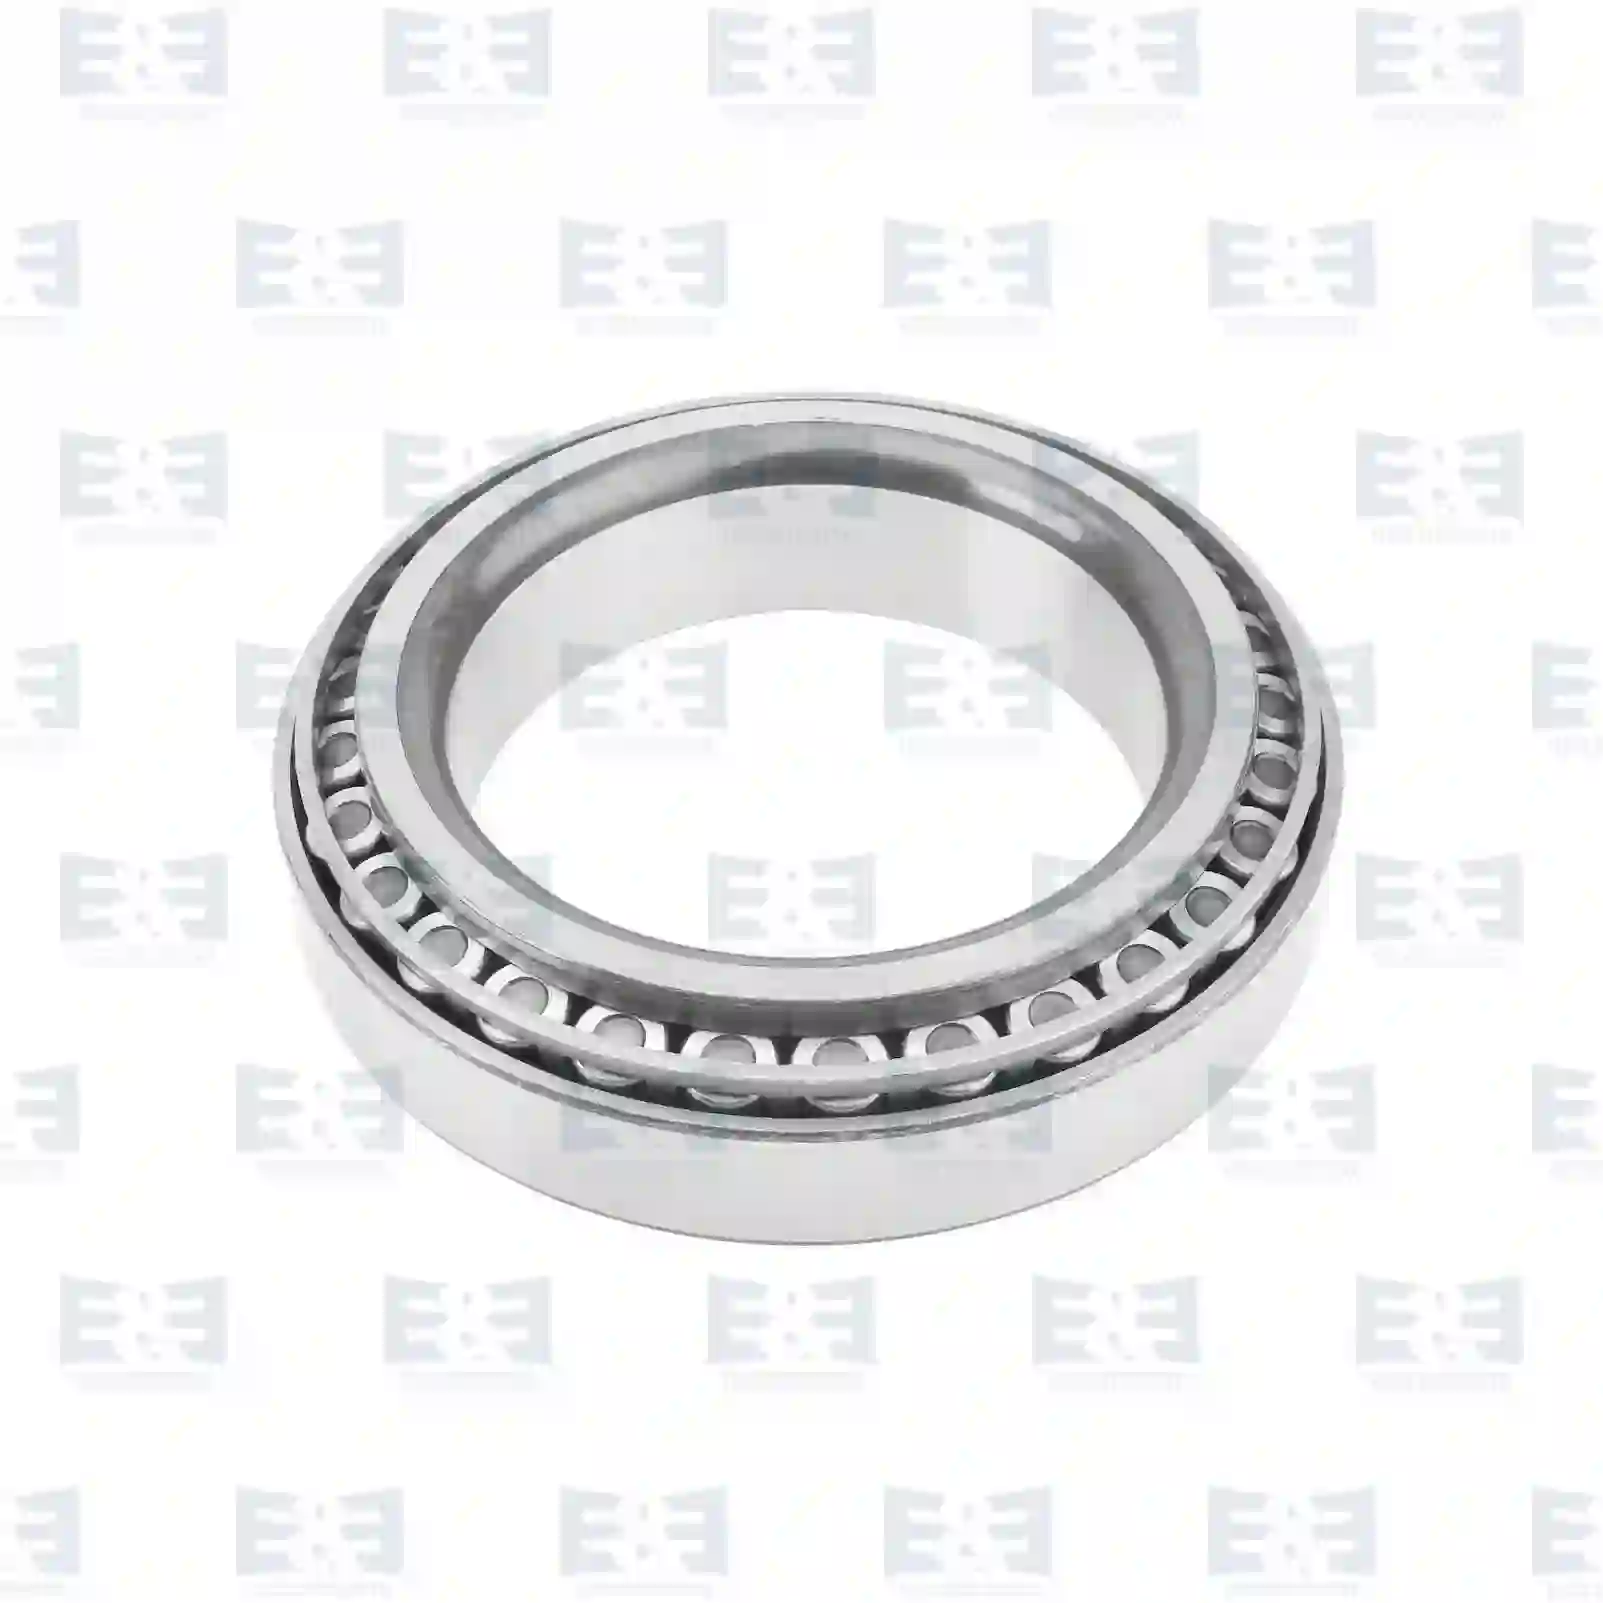 Hub Tapered roller bearing, EE No 2E2284055 ,  oem no:06324890009, 06324890030, 81934200089, 0019802502, 0049811905, 0049812005 E&E Truck Spare Parts | Truck Spare Parts, Auotomotive Spare Parts